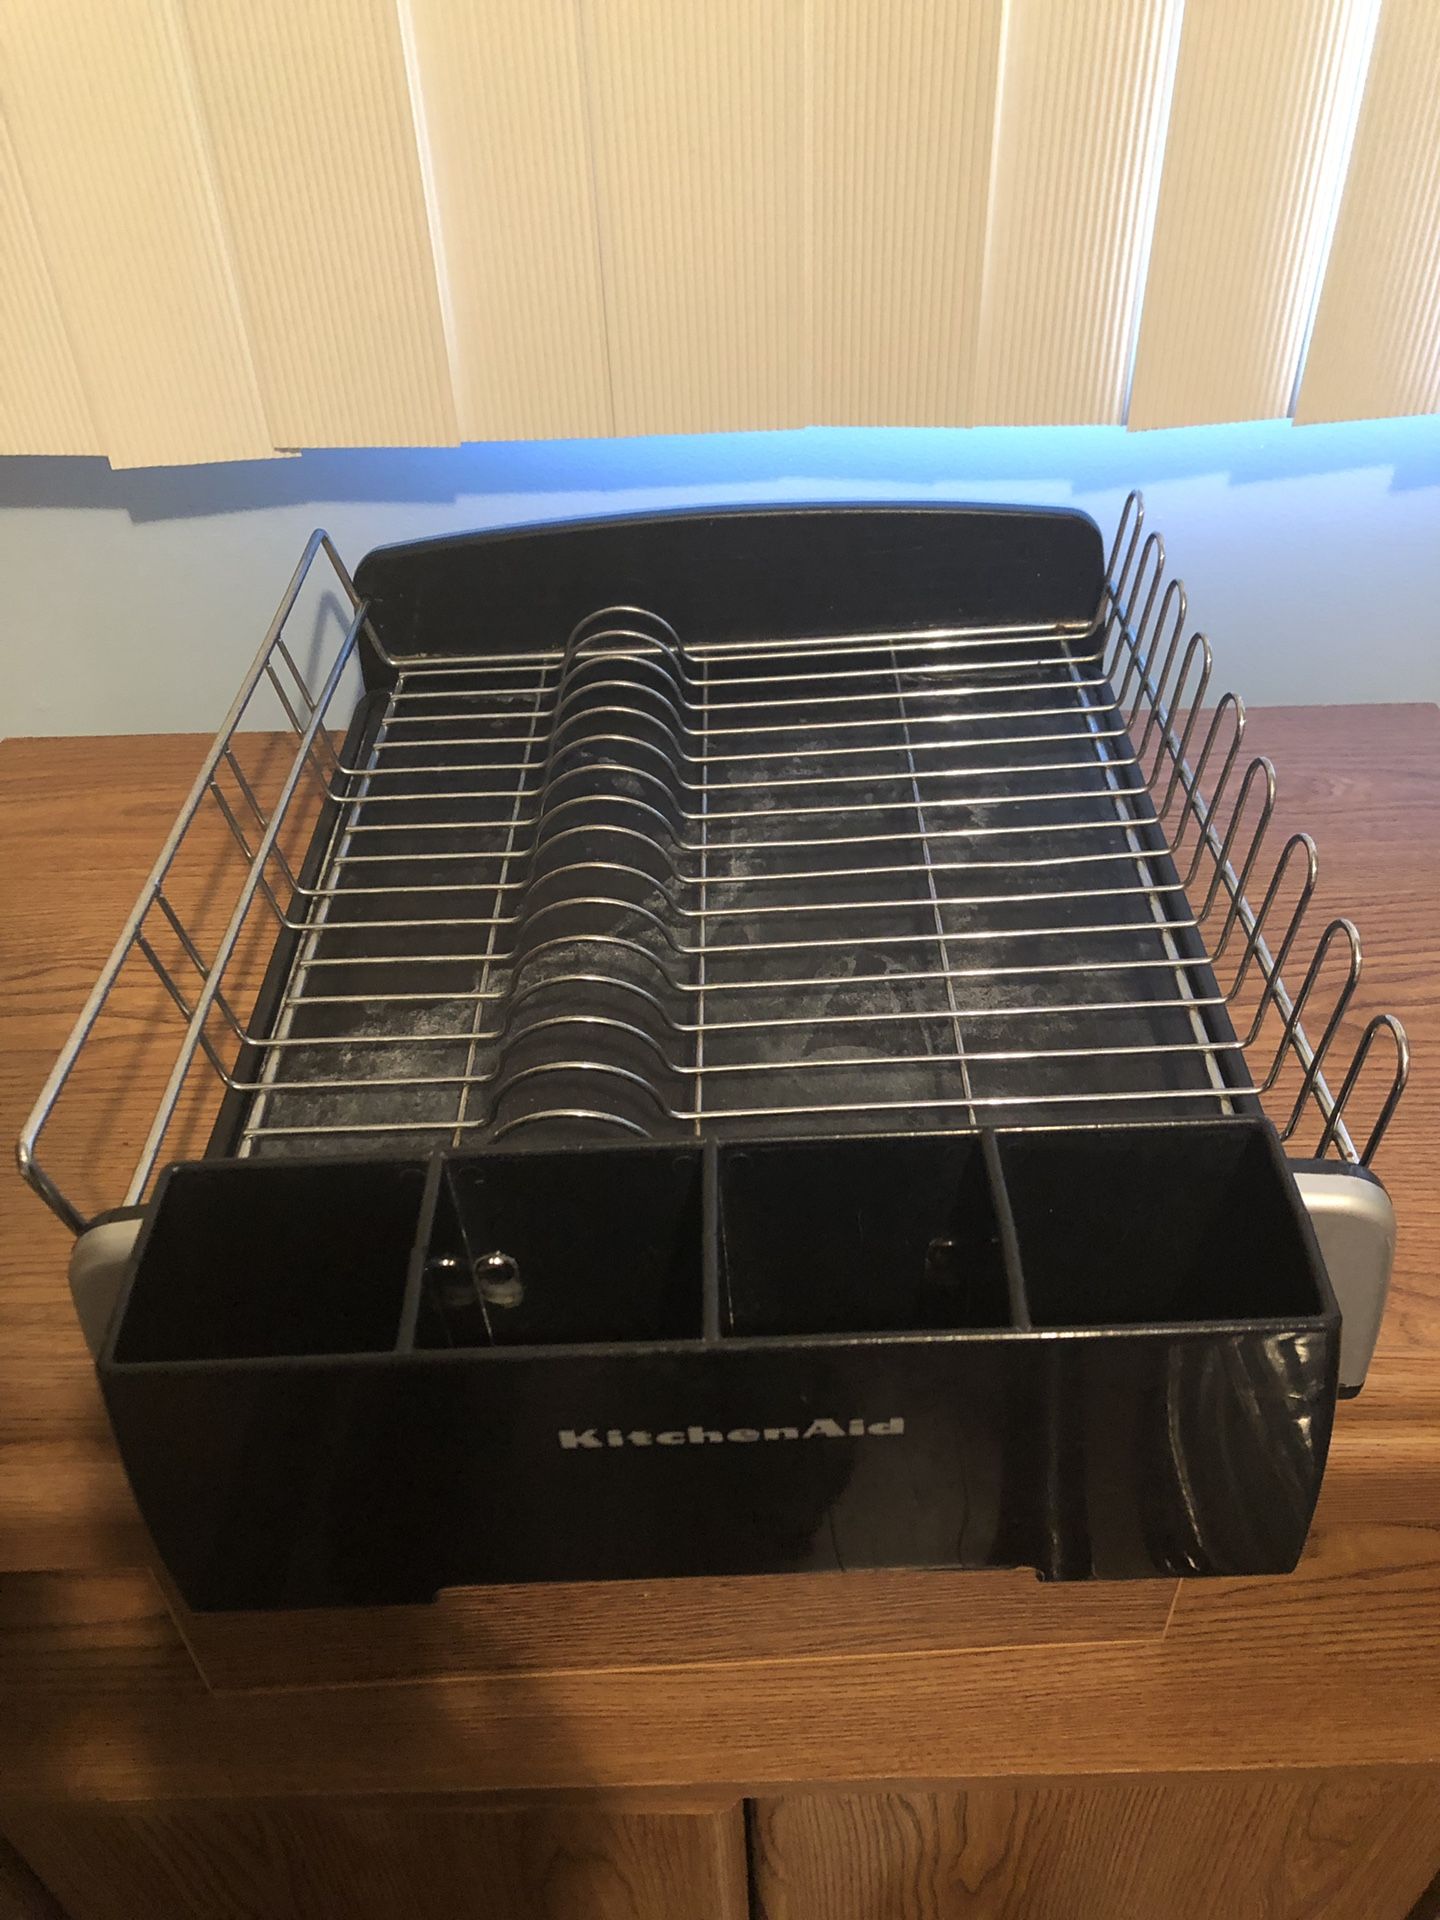 pot, dish drainer, 2 bakeware, ice cube tray, and 2 serving plates, all $ 10